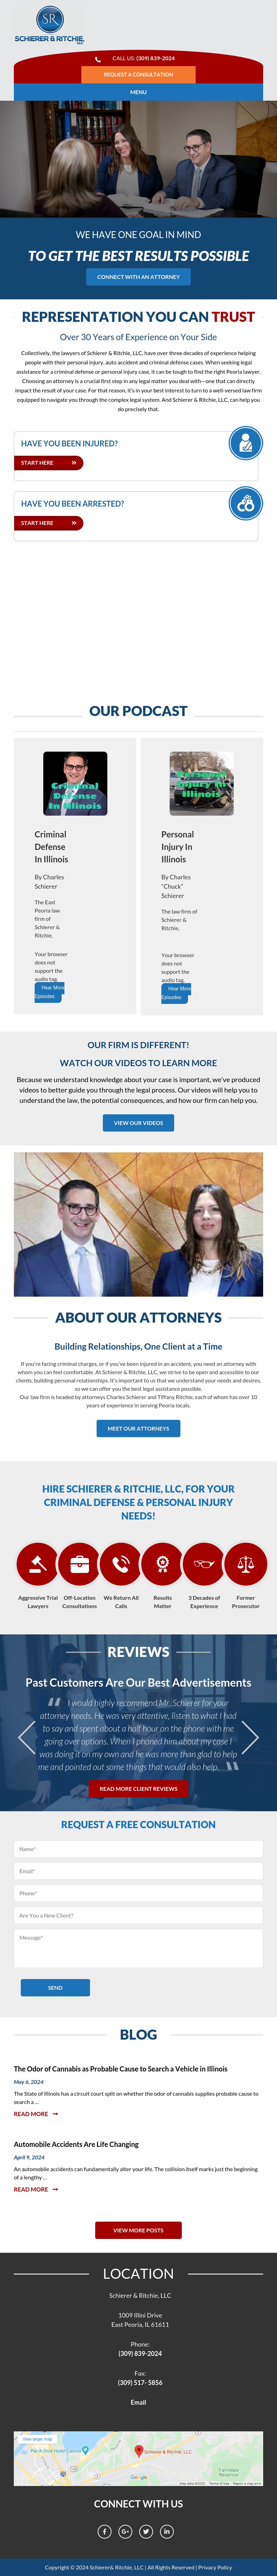 Schierer & Ritchie, LLC - East Peoria IL Lawyers